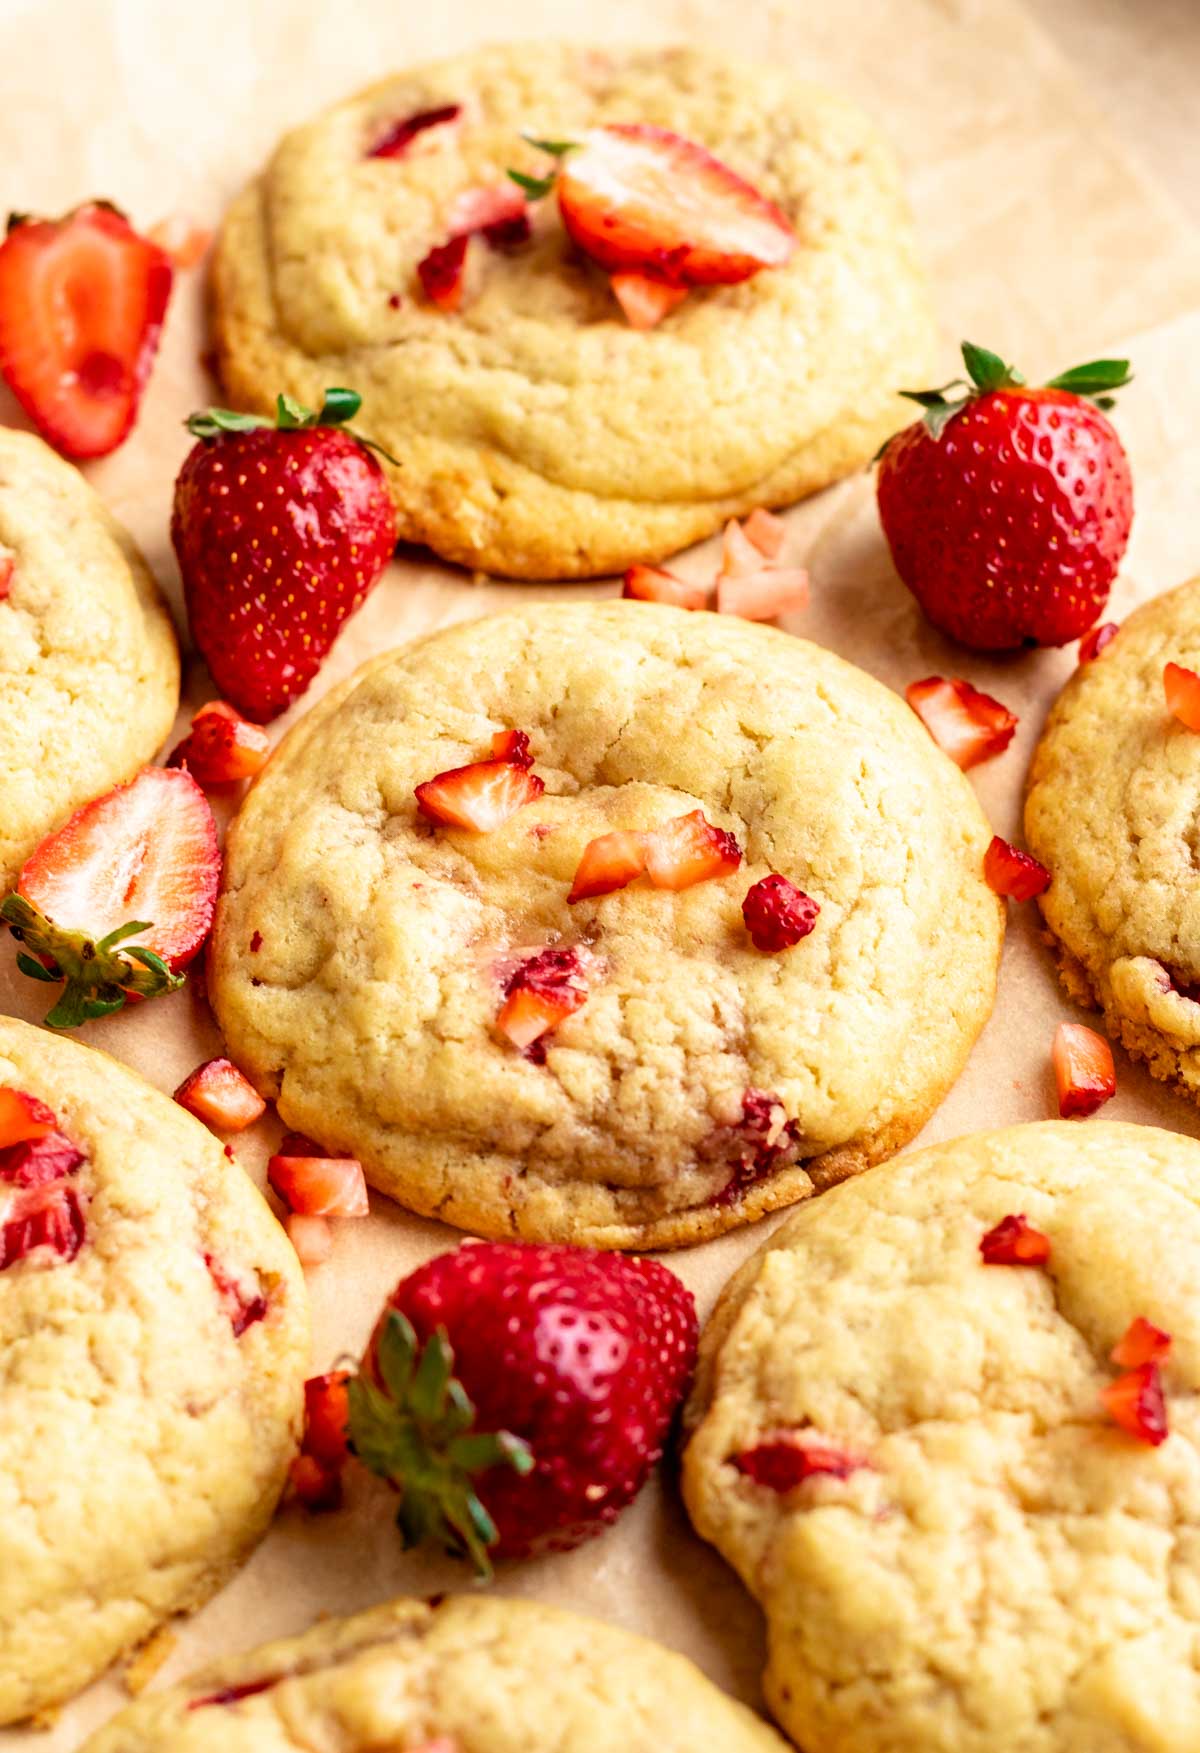 Strawberry cream cheese cookies on a parchment paper.